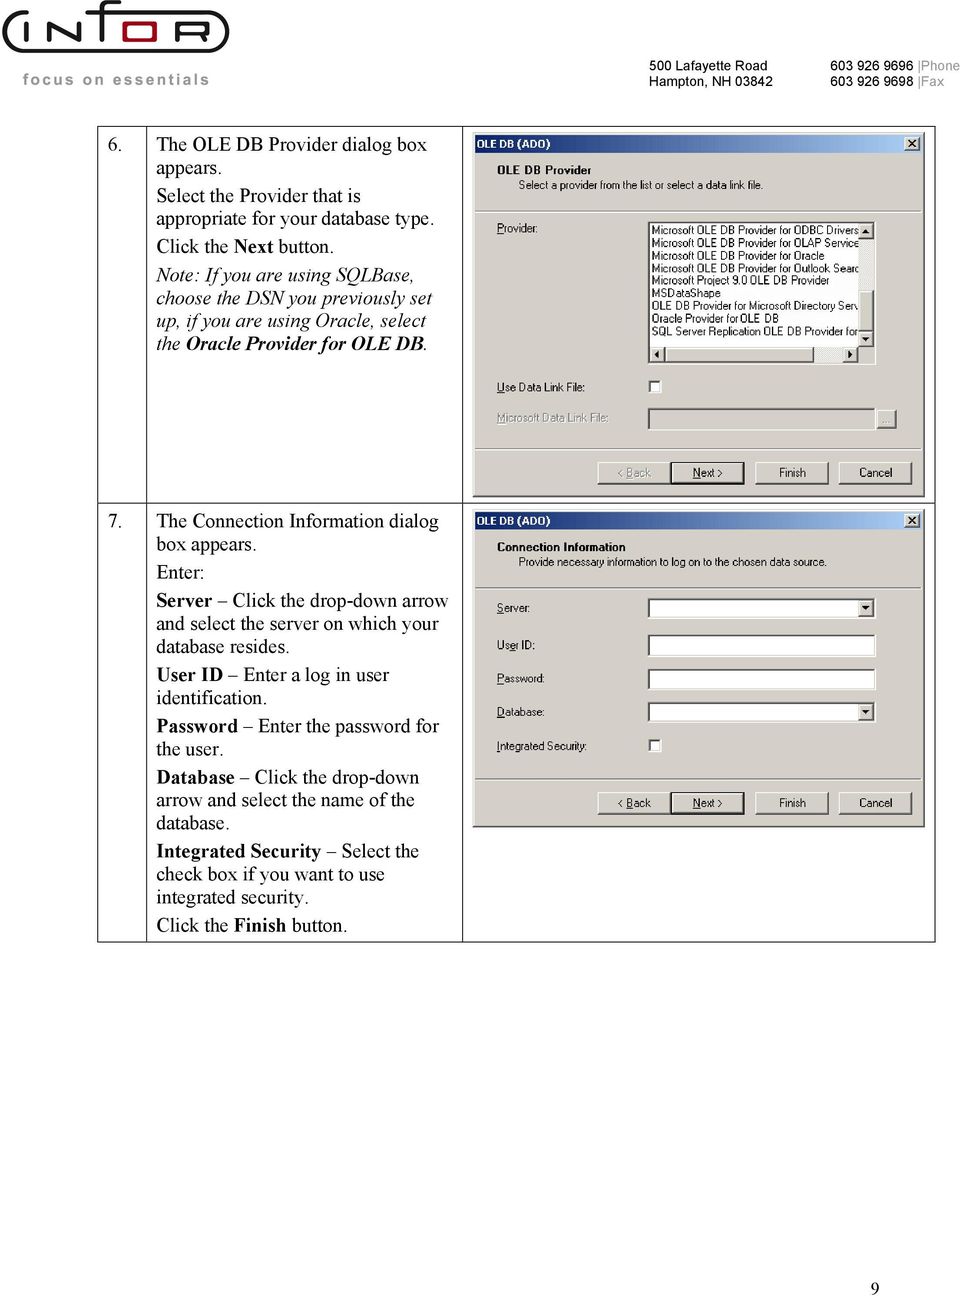 The Connection Information dialog box Enter: Server Click the drop-down arrow and select the server on which your database resides.